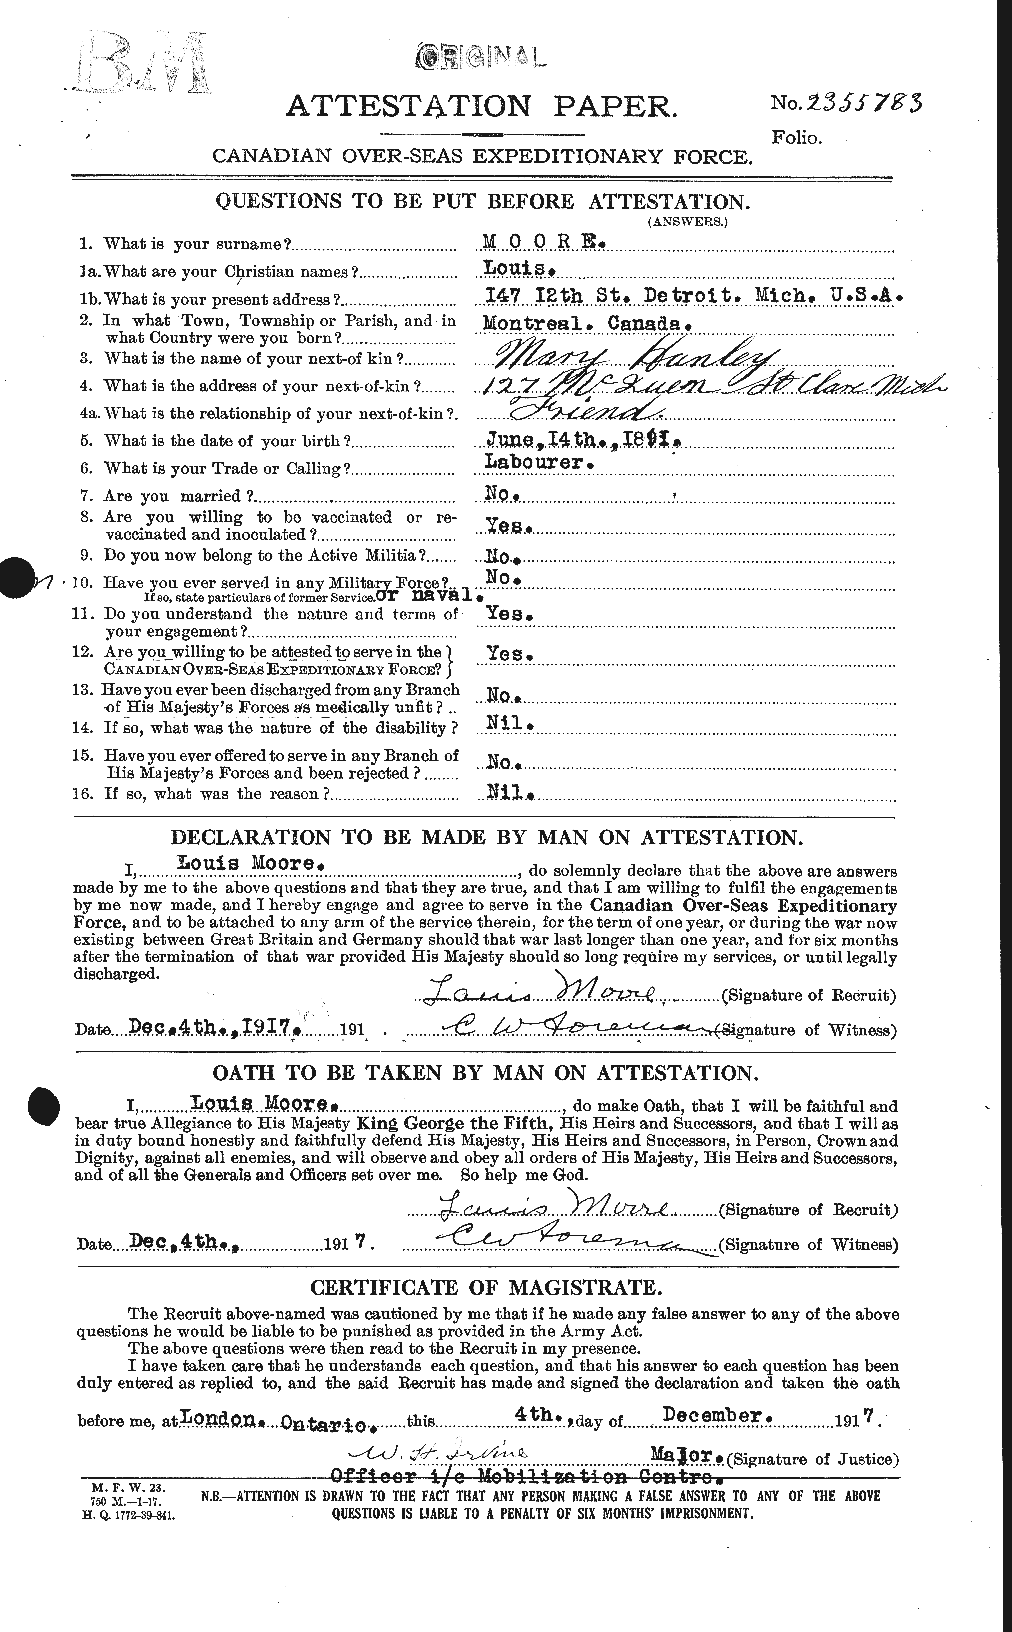 Personnel Records of the First World War - CEF 503420a